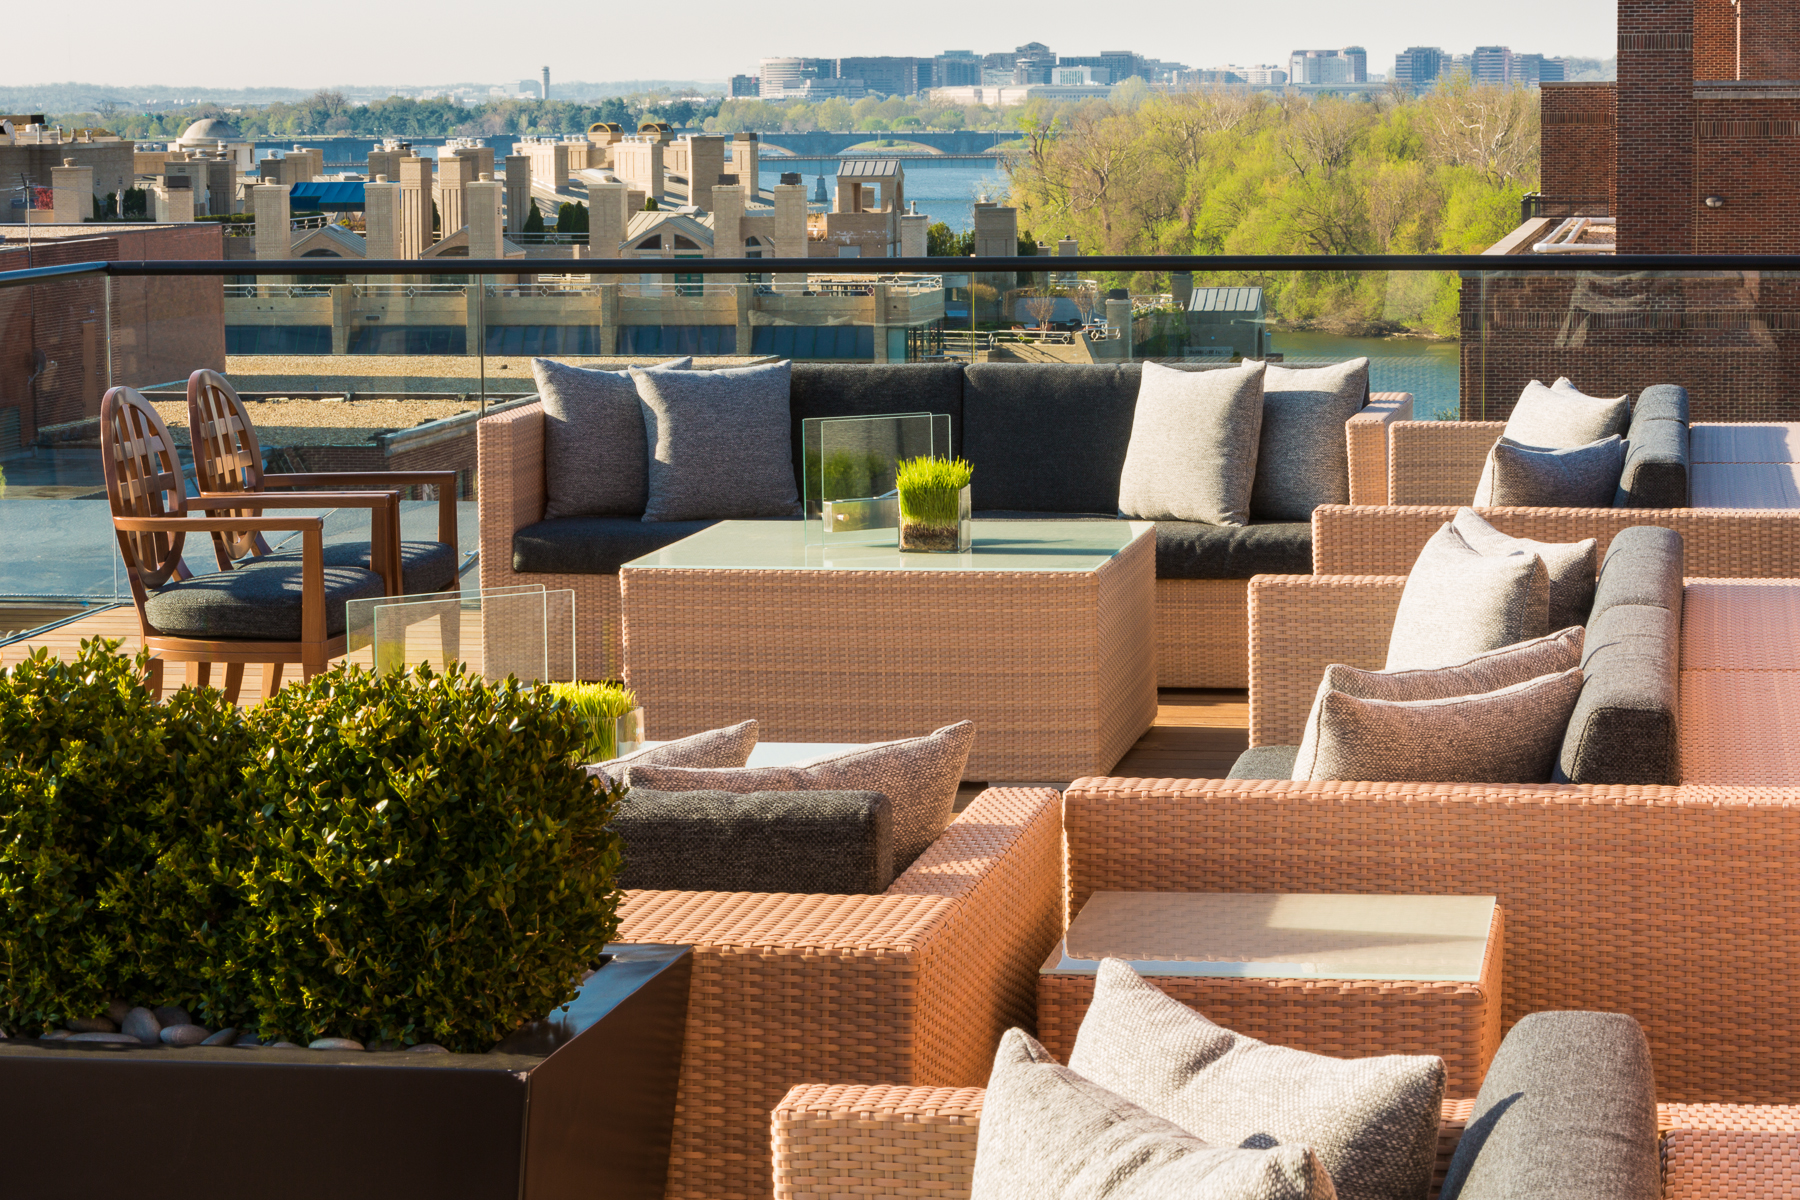 The Rosewood's rooftop lounge